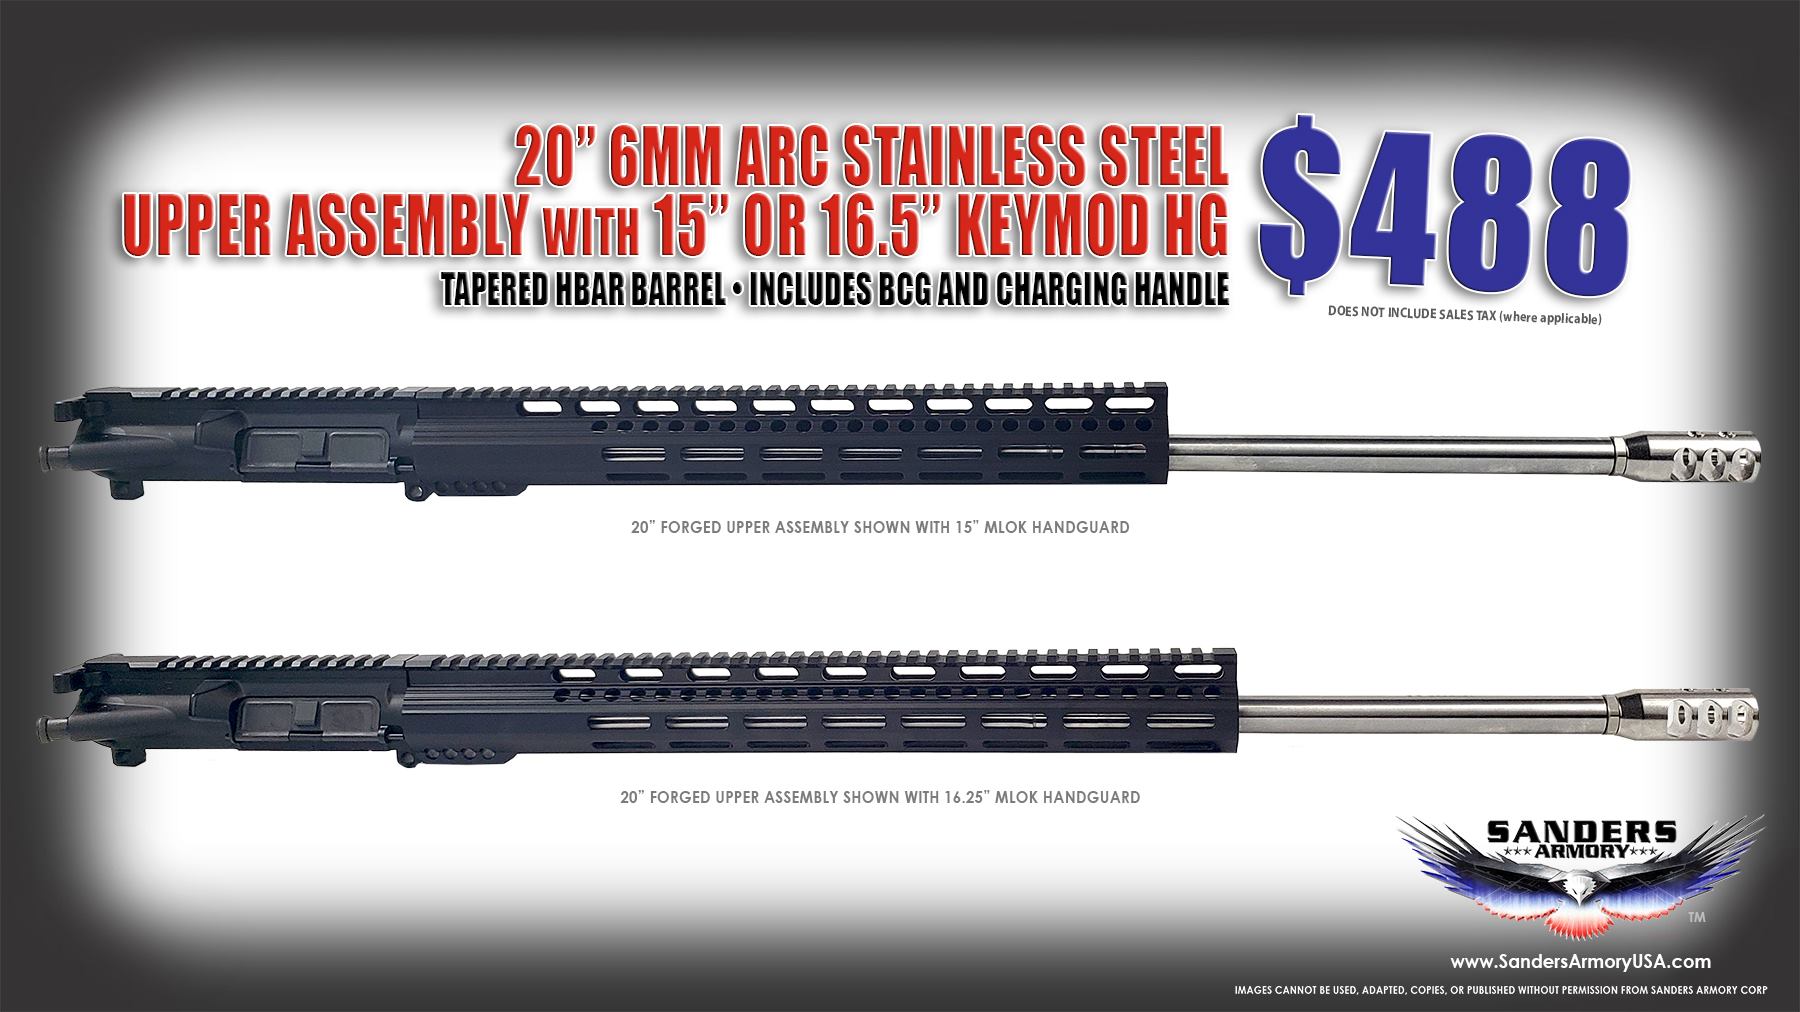 Sanders Armory AR-15 20" 6MM ARC Match Grade Stainless Steel 5R Tapered HBAR COMPLETE Upper Assembly with BCG and Charging Handle comes with a Match Grade barrel that has been hand lapped and air gauge tested with 5R rifling